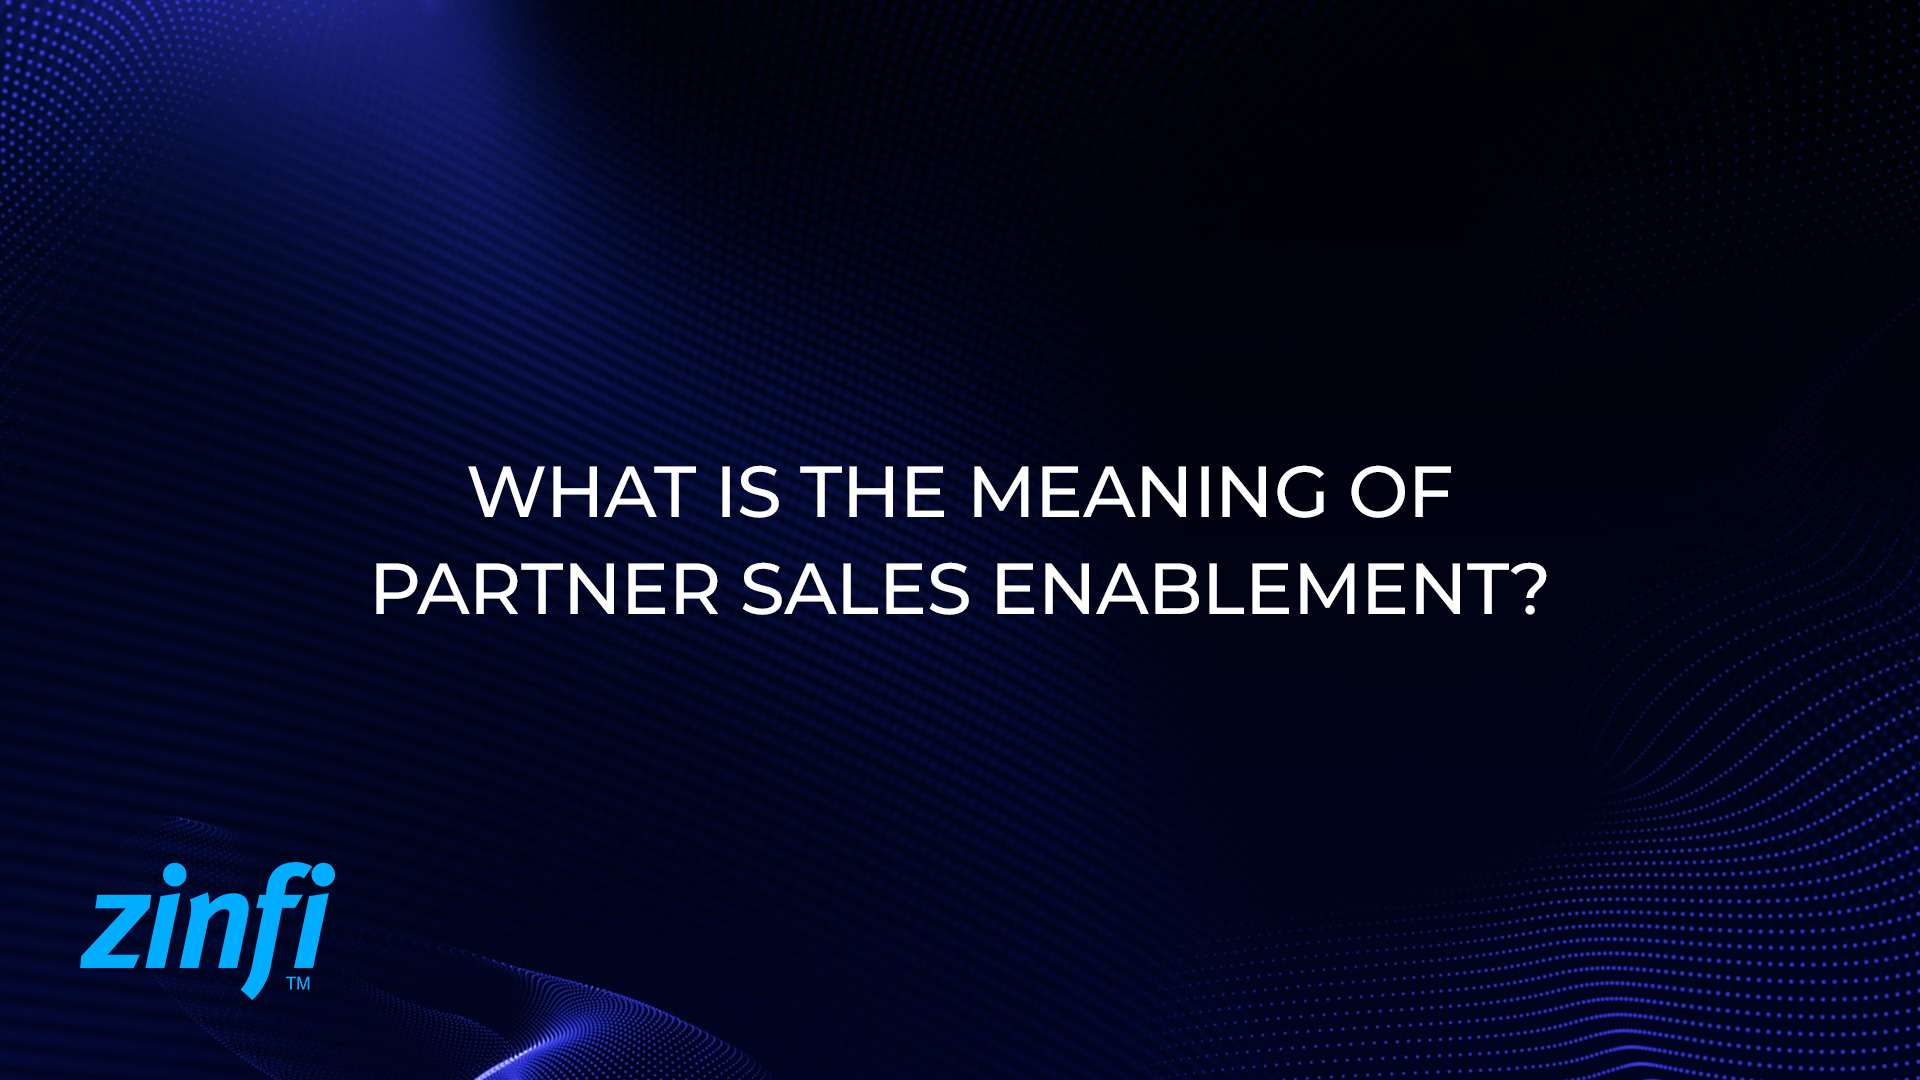 Meaning of Partner Sales Enablement